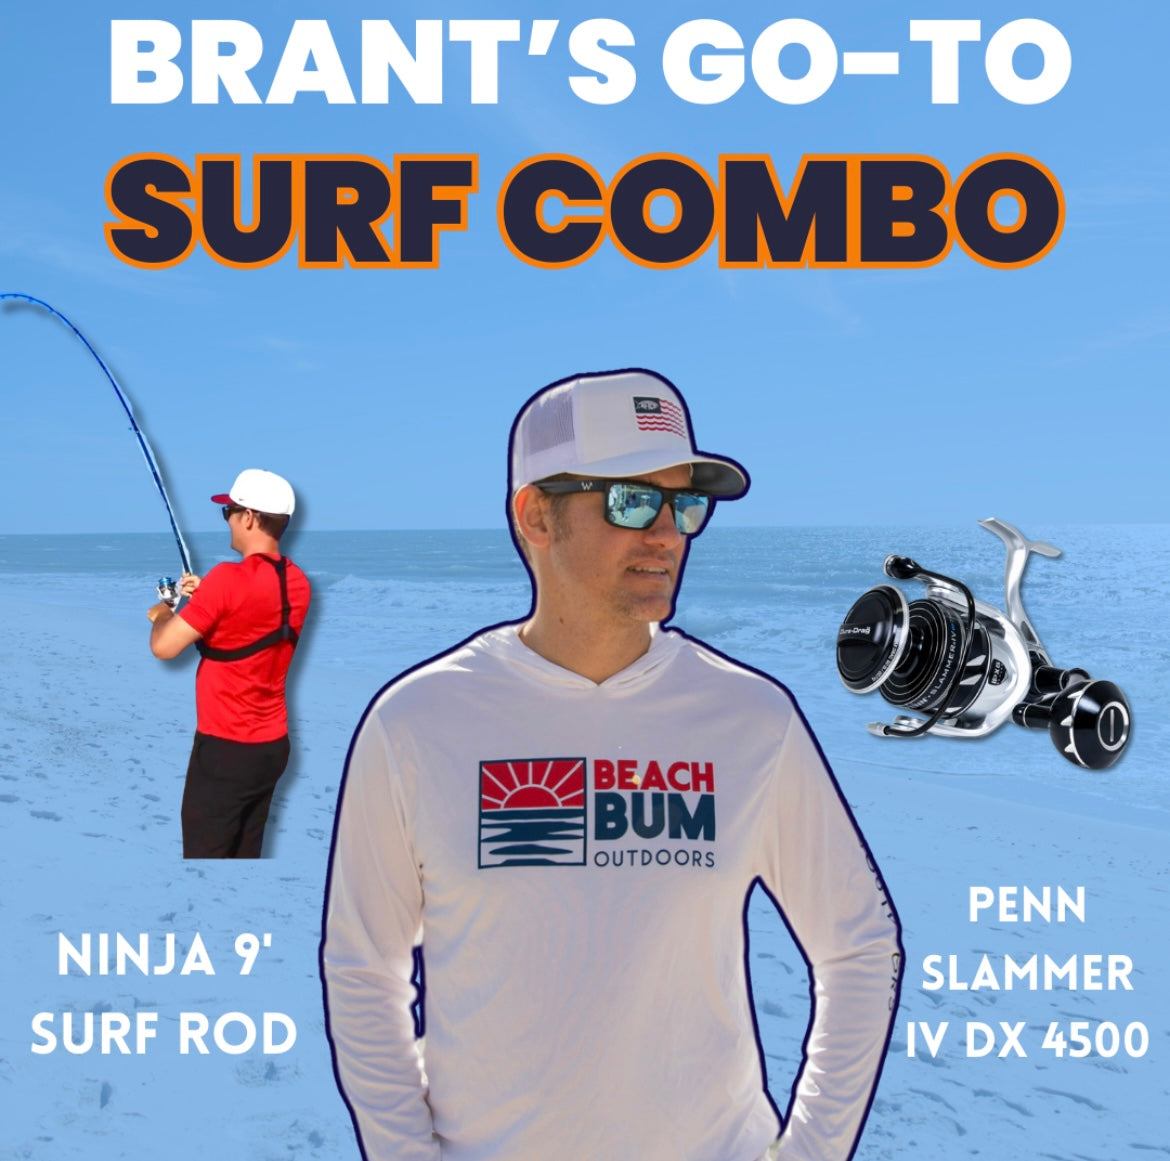 Brant's Go-To Surf Combo